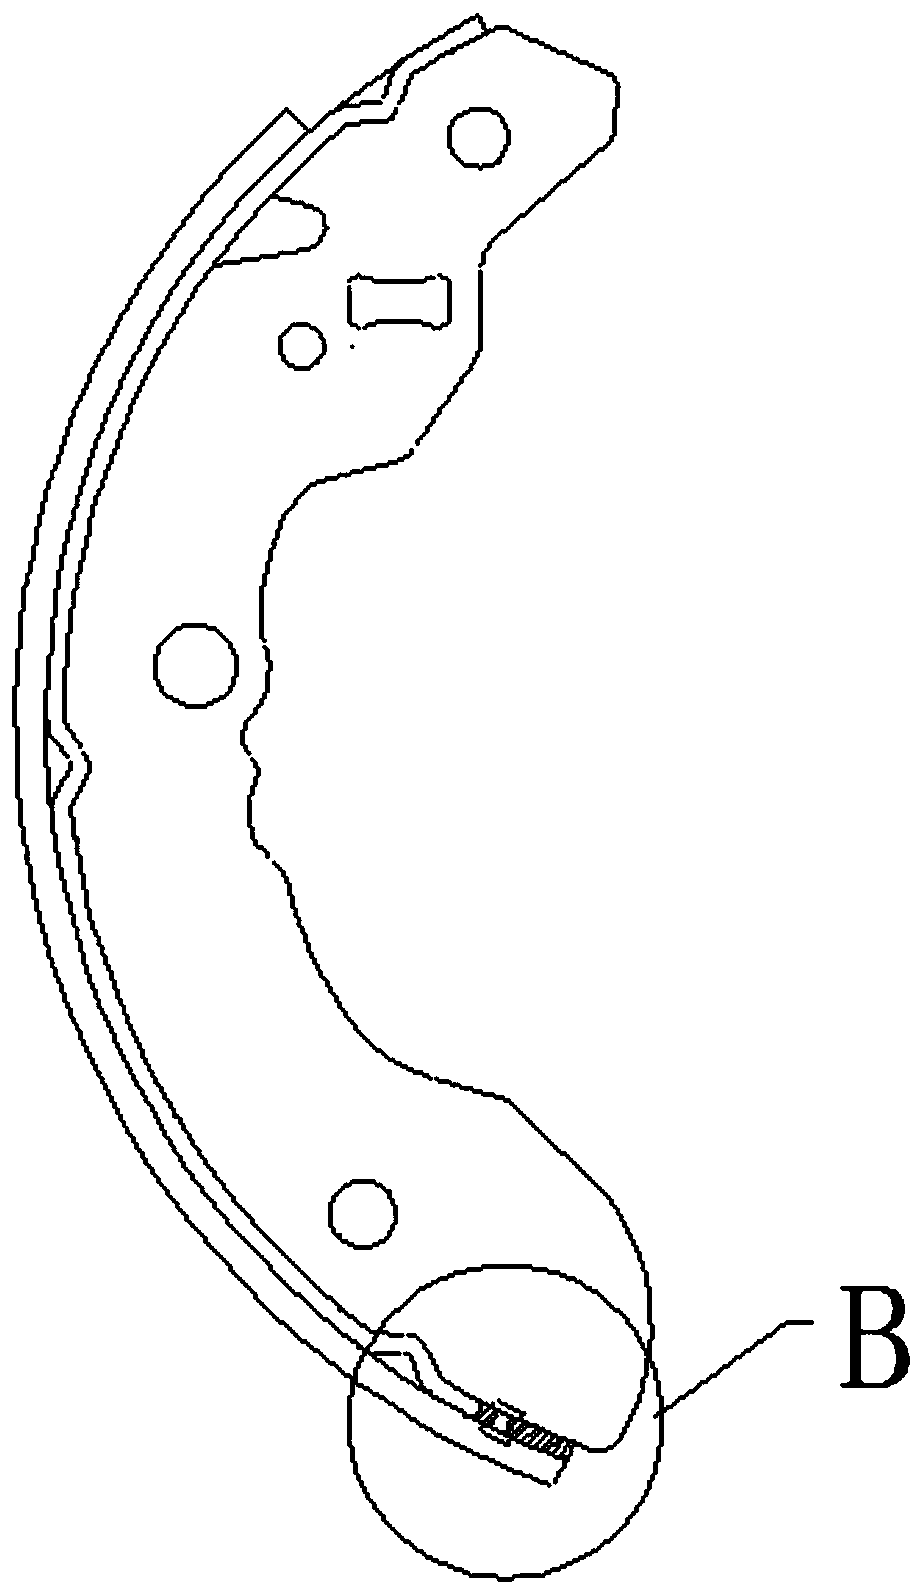 Brake shoe assembly with wireless alarm function